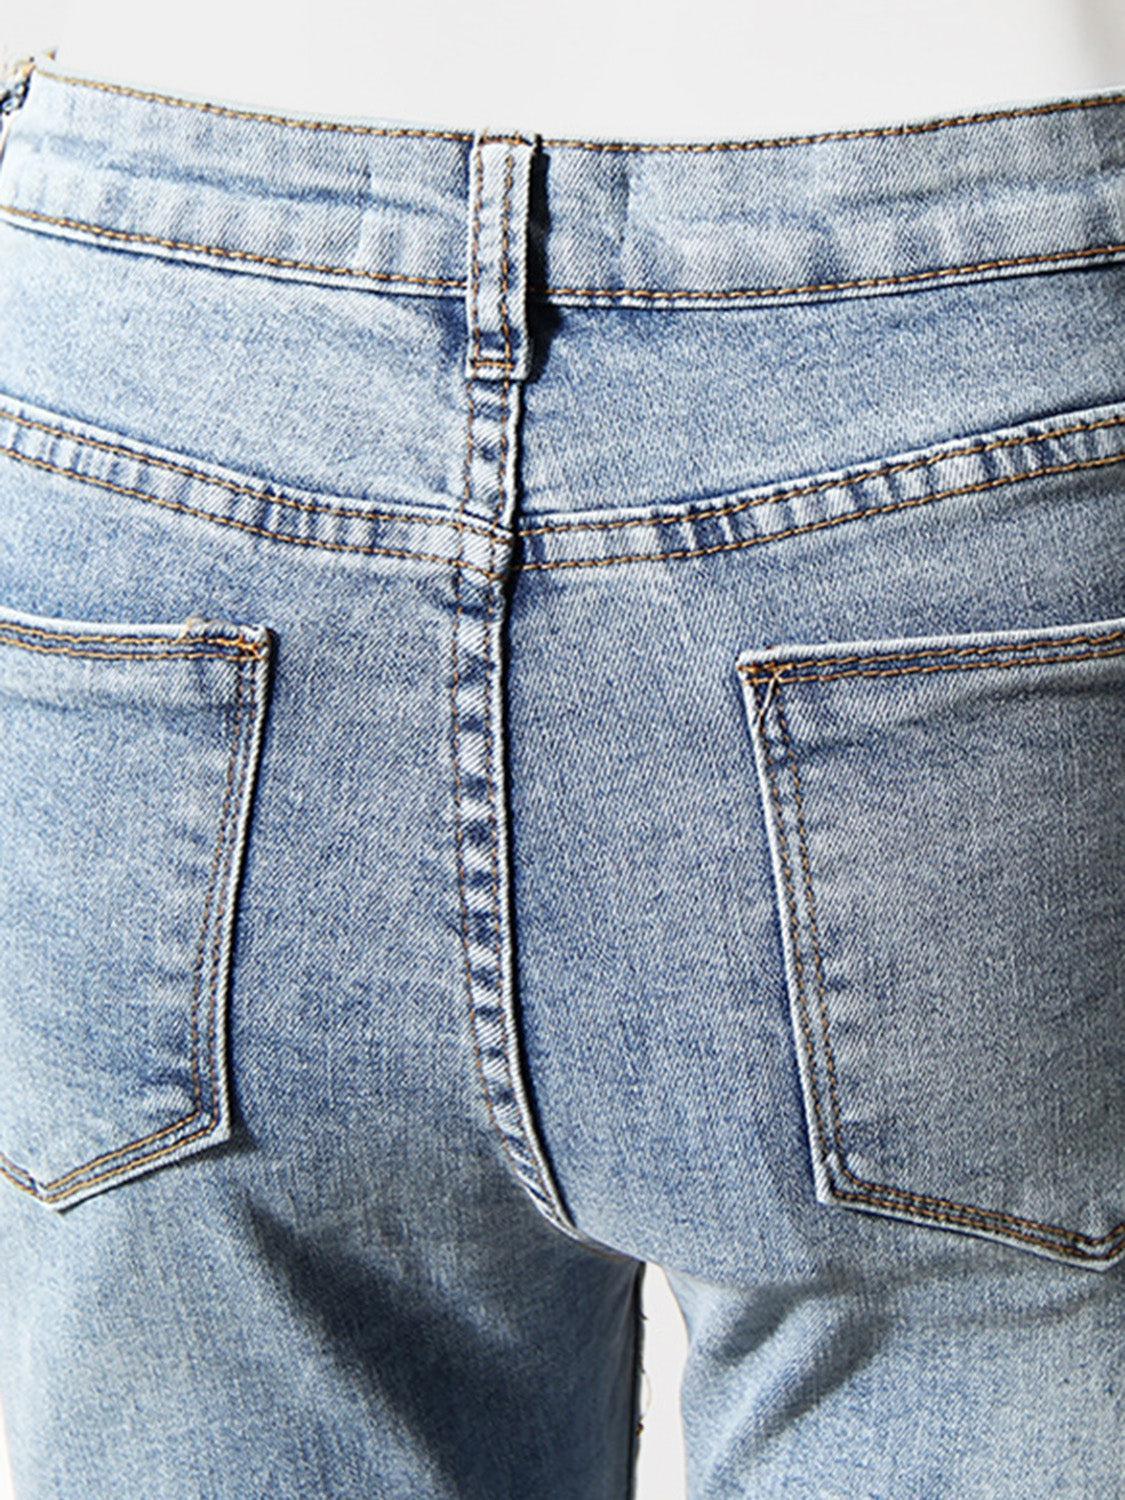 a close up of a person's jeans with a cell phone in their pocket